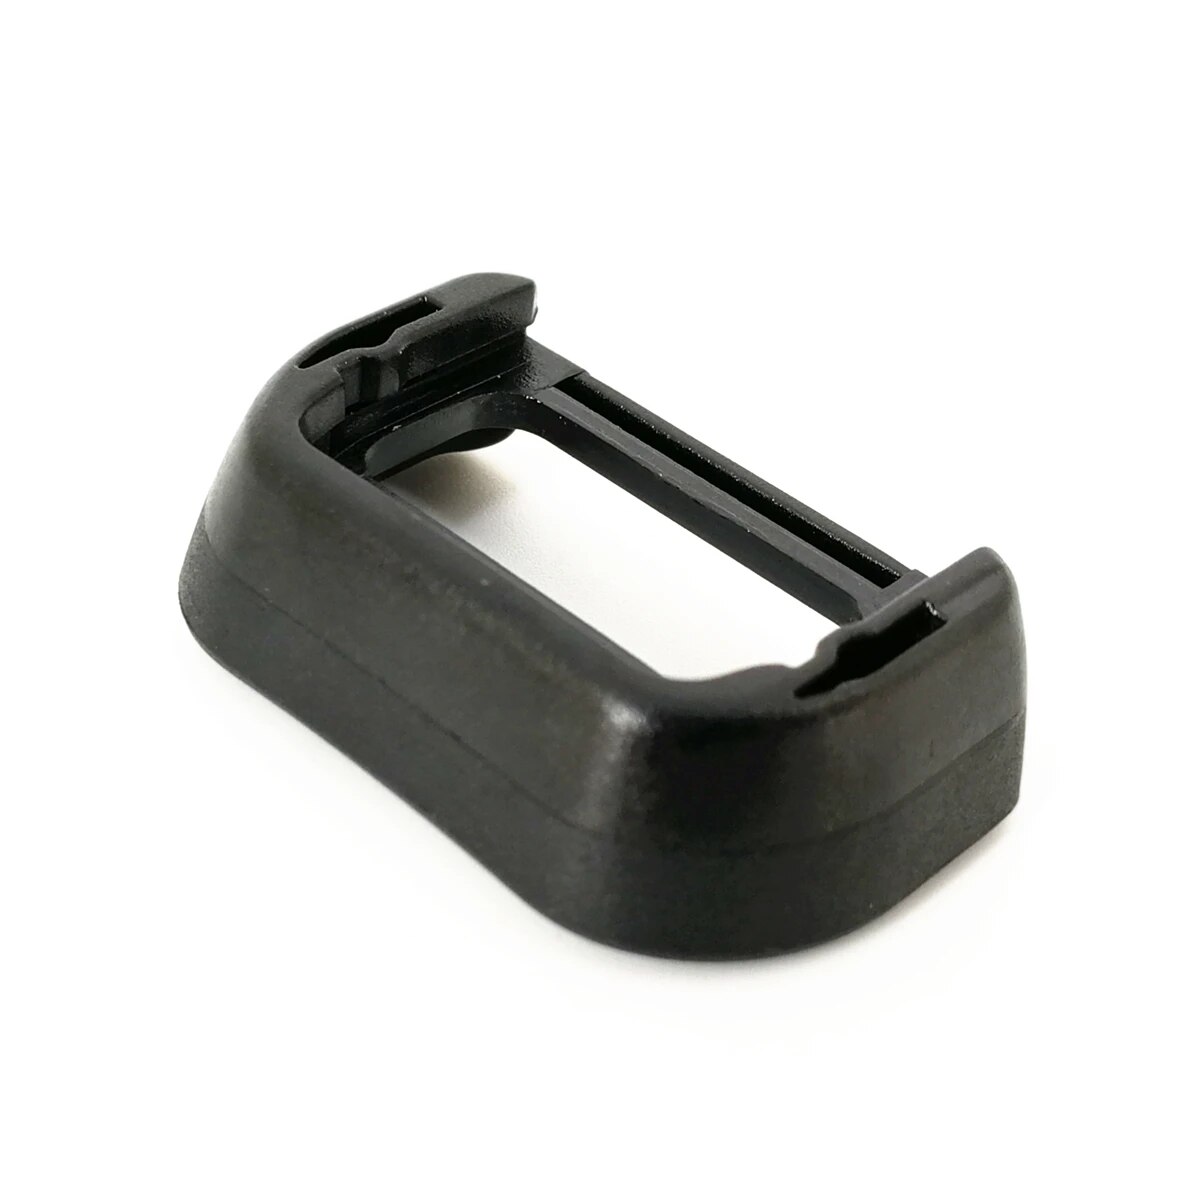 【New Arrival】 Hard / Soft Viewfinder Eyecup Eye Cup Eyepiece Replace -Ep17 For A6600 A6500 A6400 Ilce-6600 Ilce-6500 Ep17